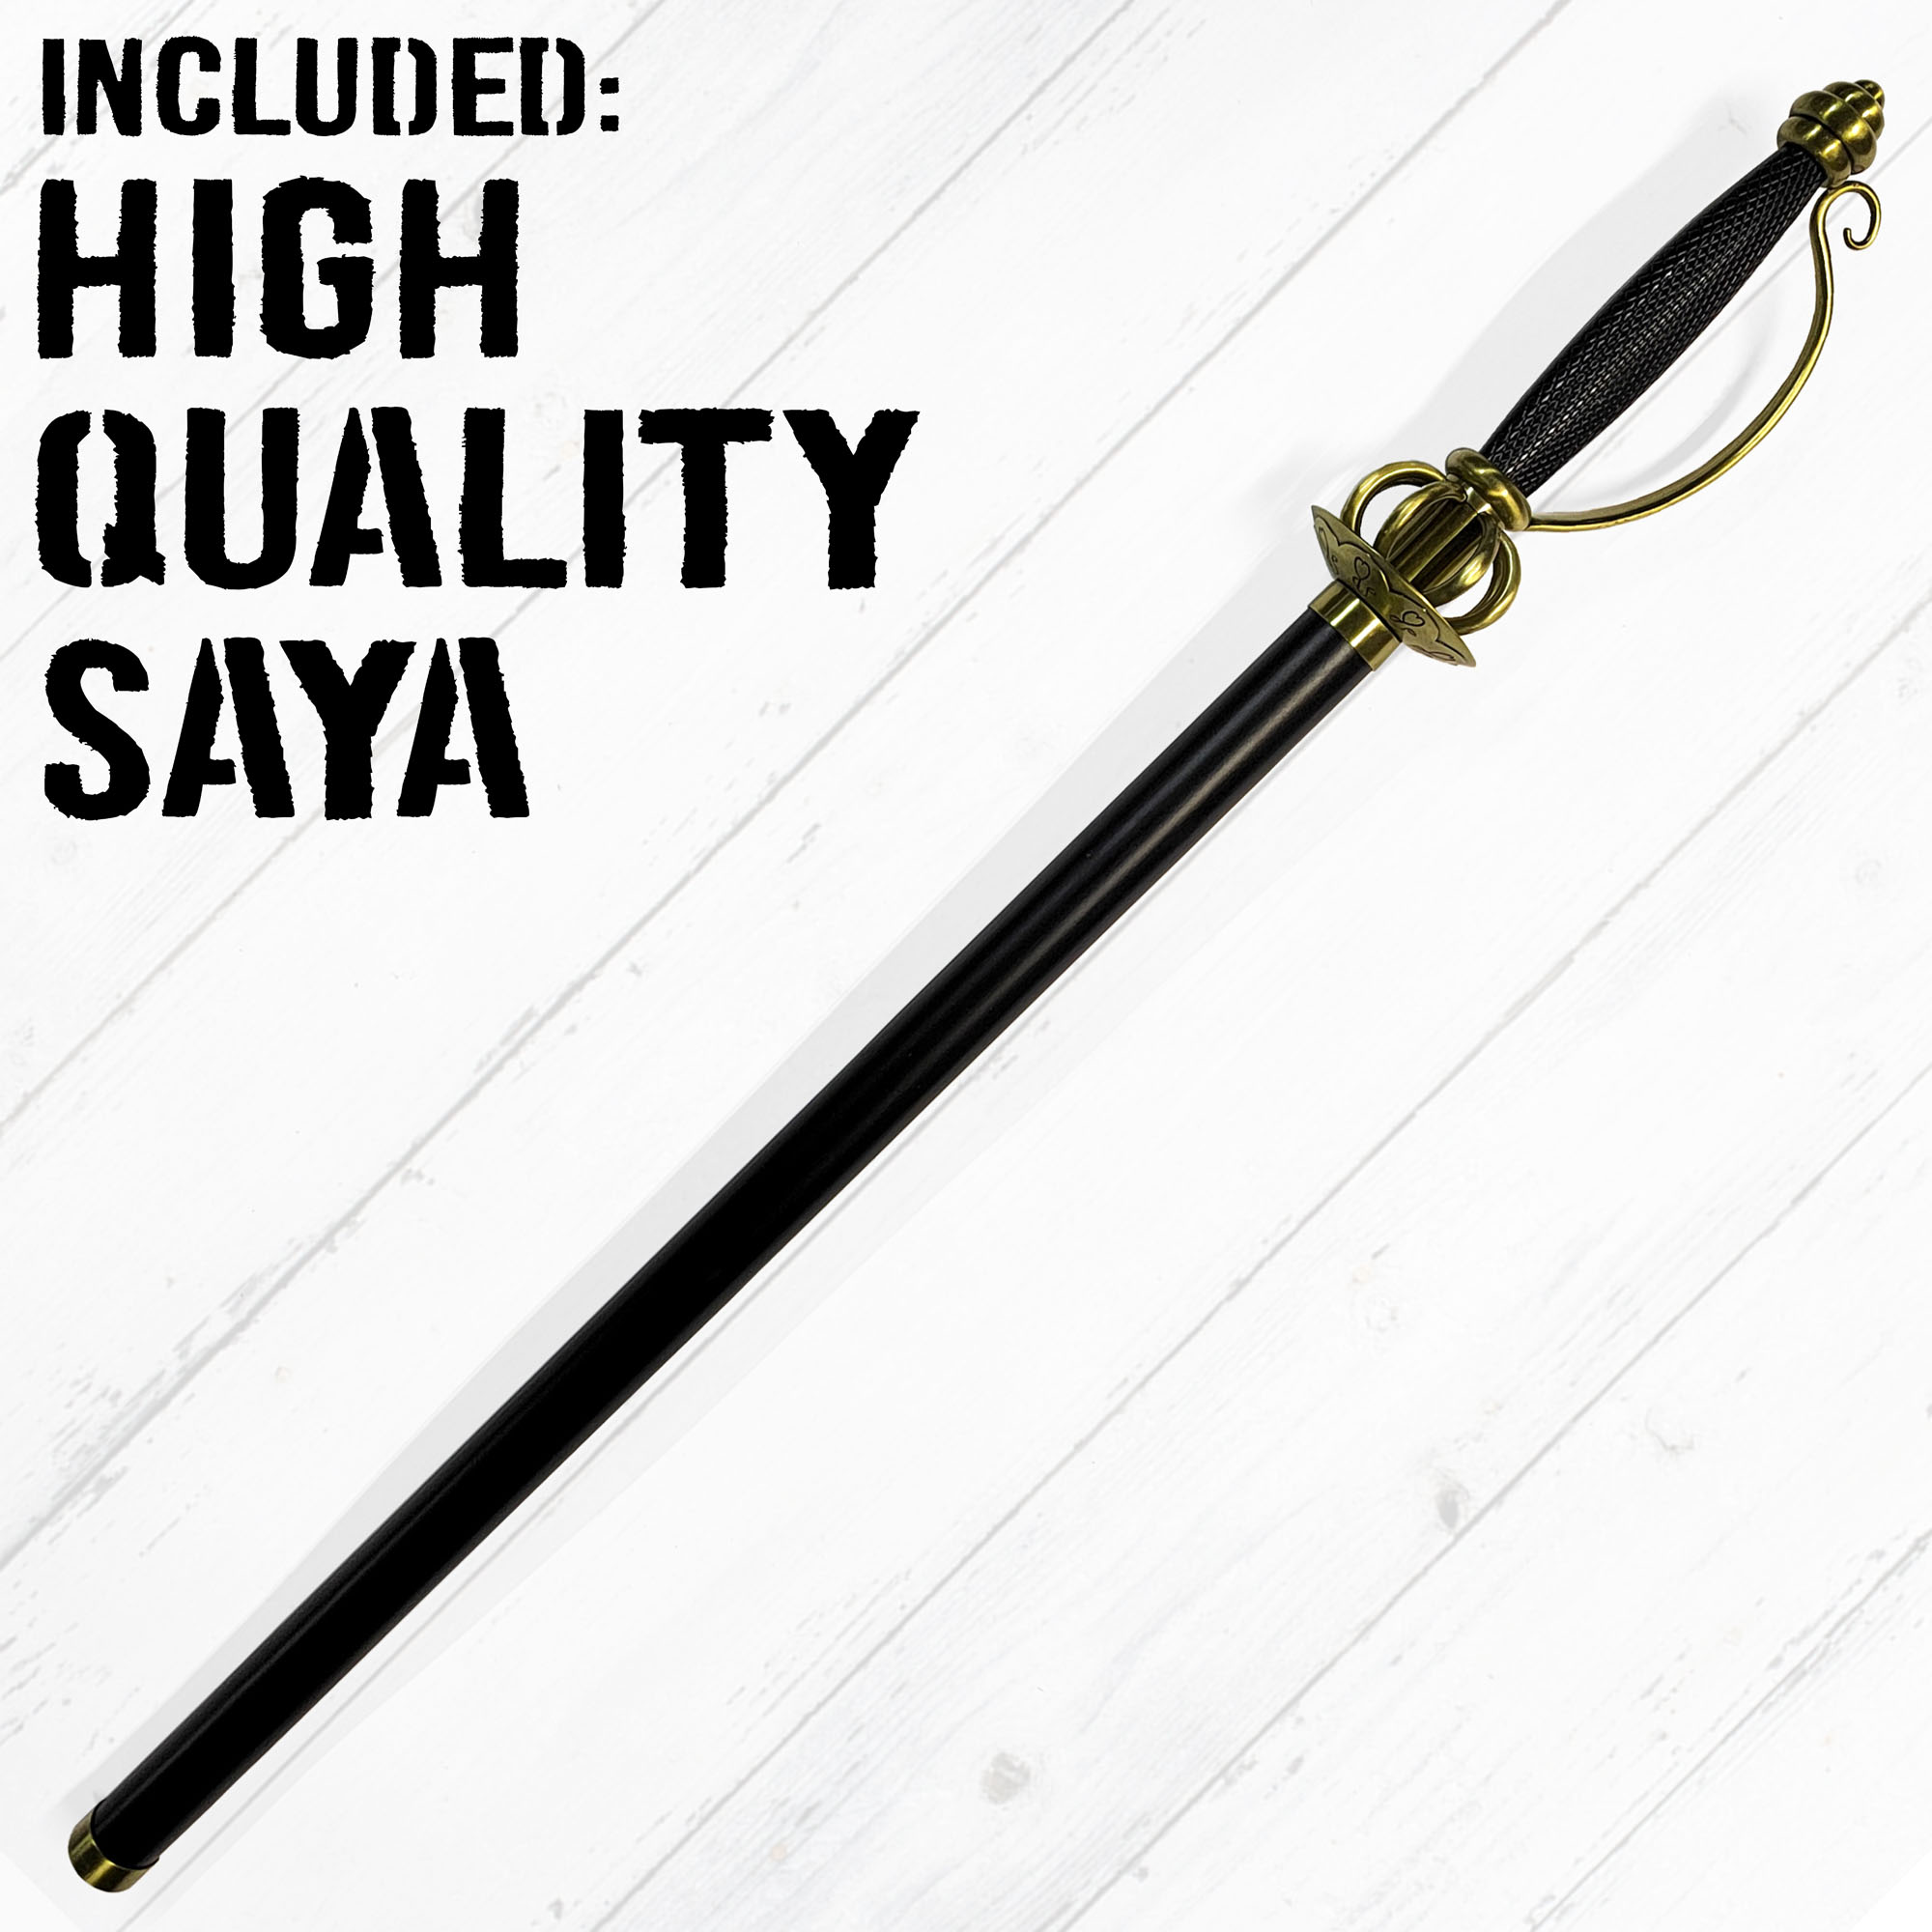 One Piece - Cavendish's Sword with Sheath - straight Blade